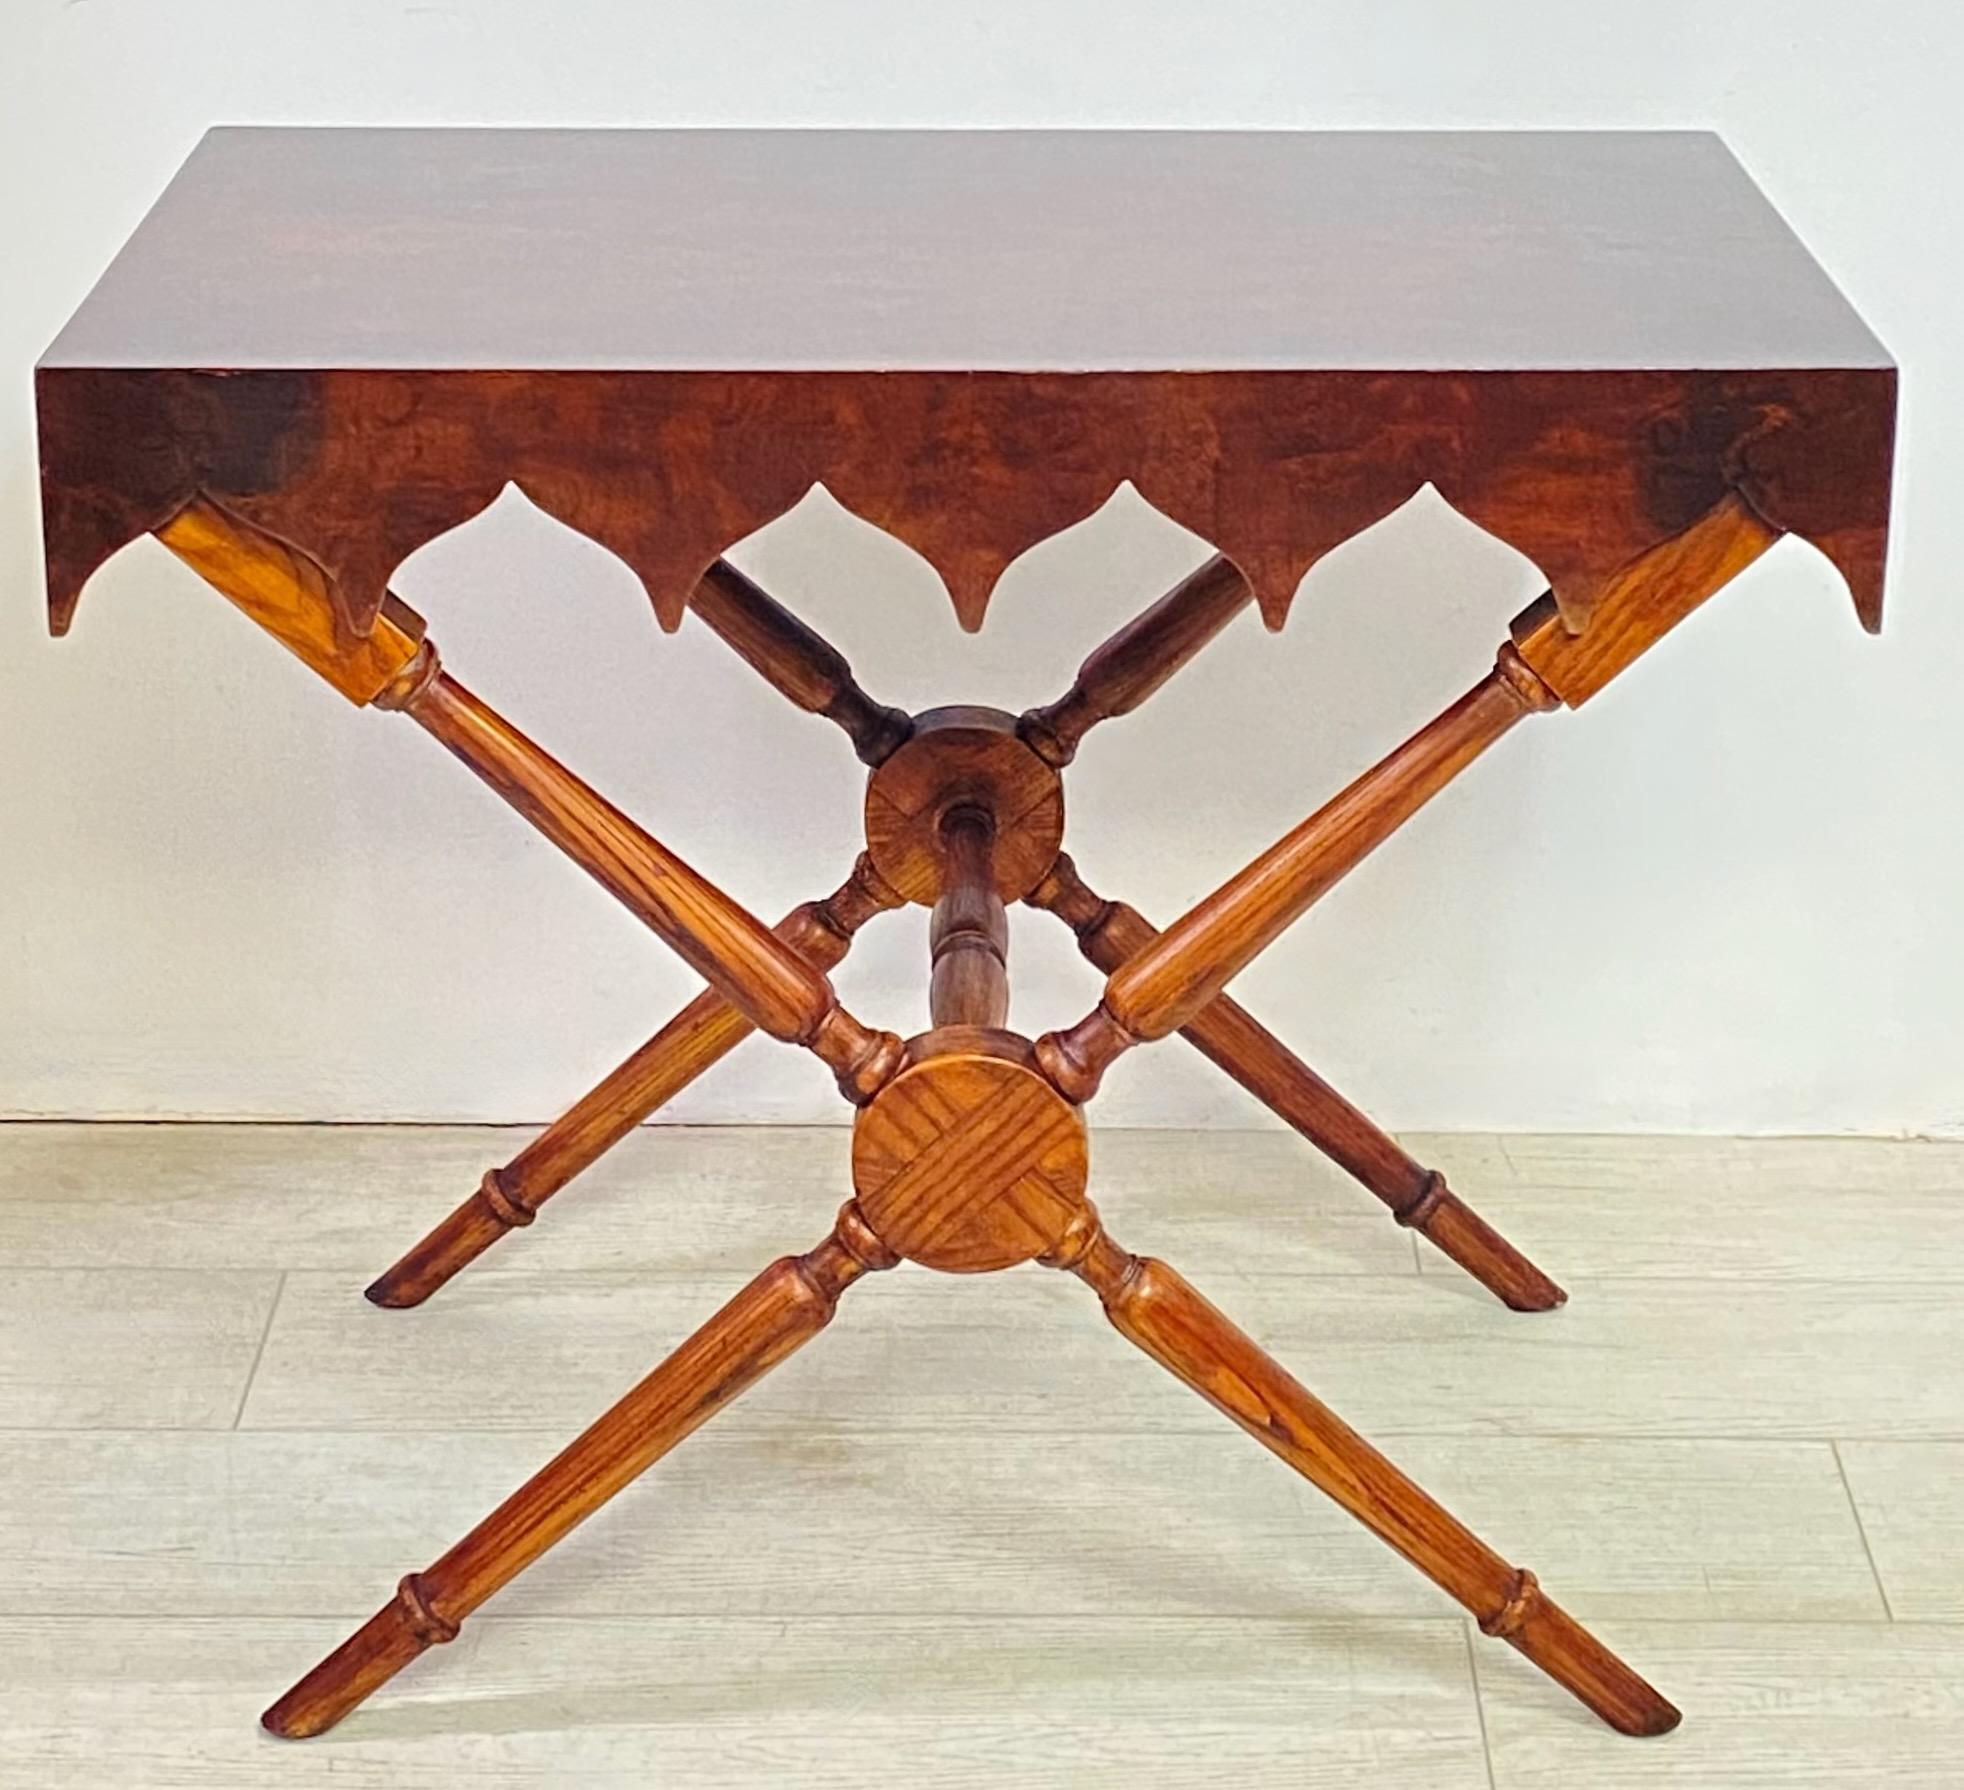 An unusual whimsical mid to late 19th century walnut side table. 
High figural walnut grain with an interesting exaggerated apron on a campaign style oak x stretcher base. 
This table was refinished and restored some time in the last quarter of